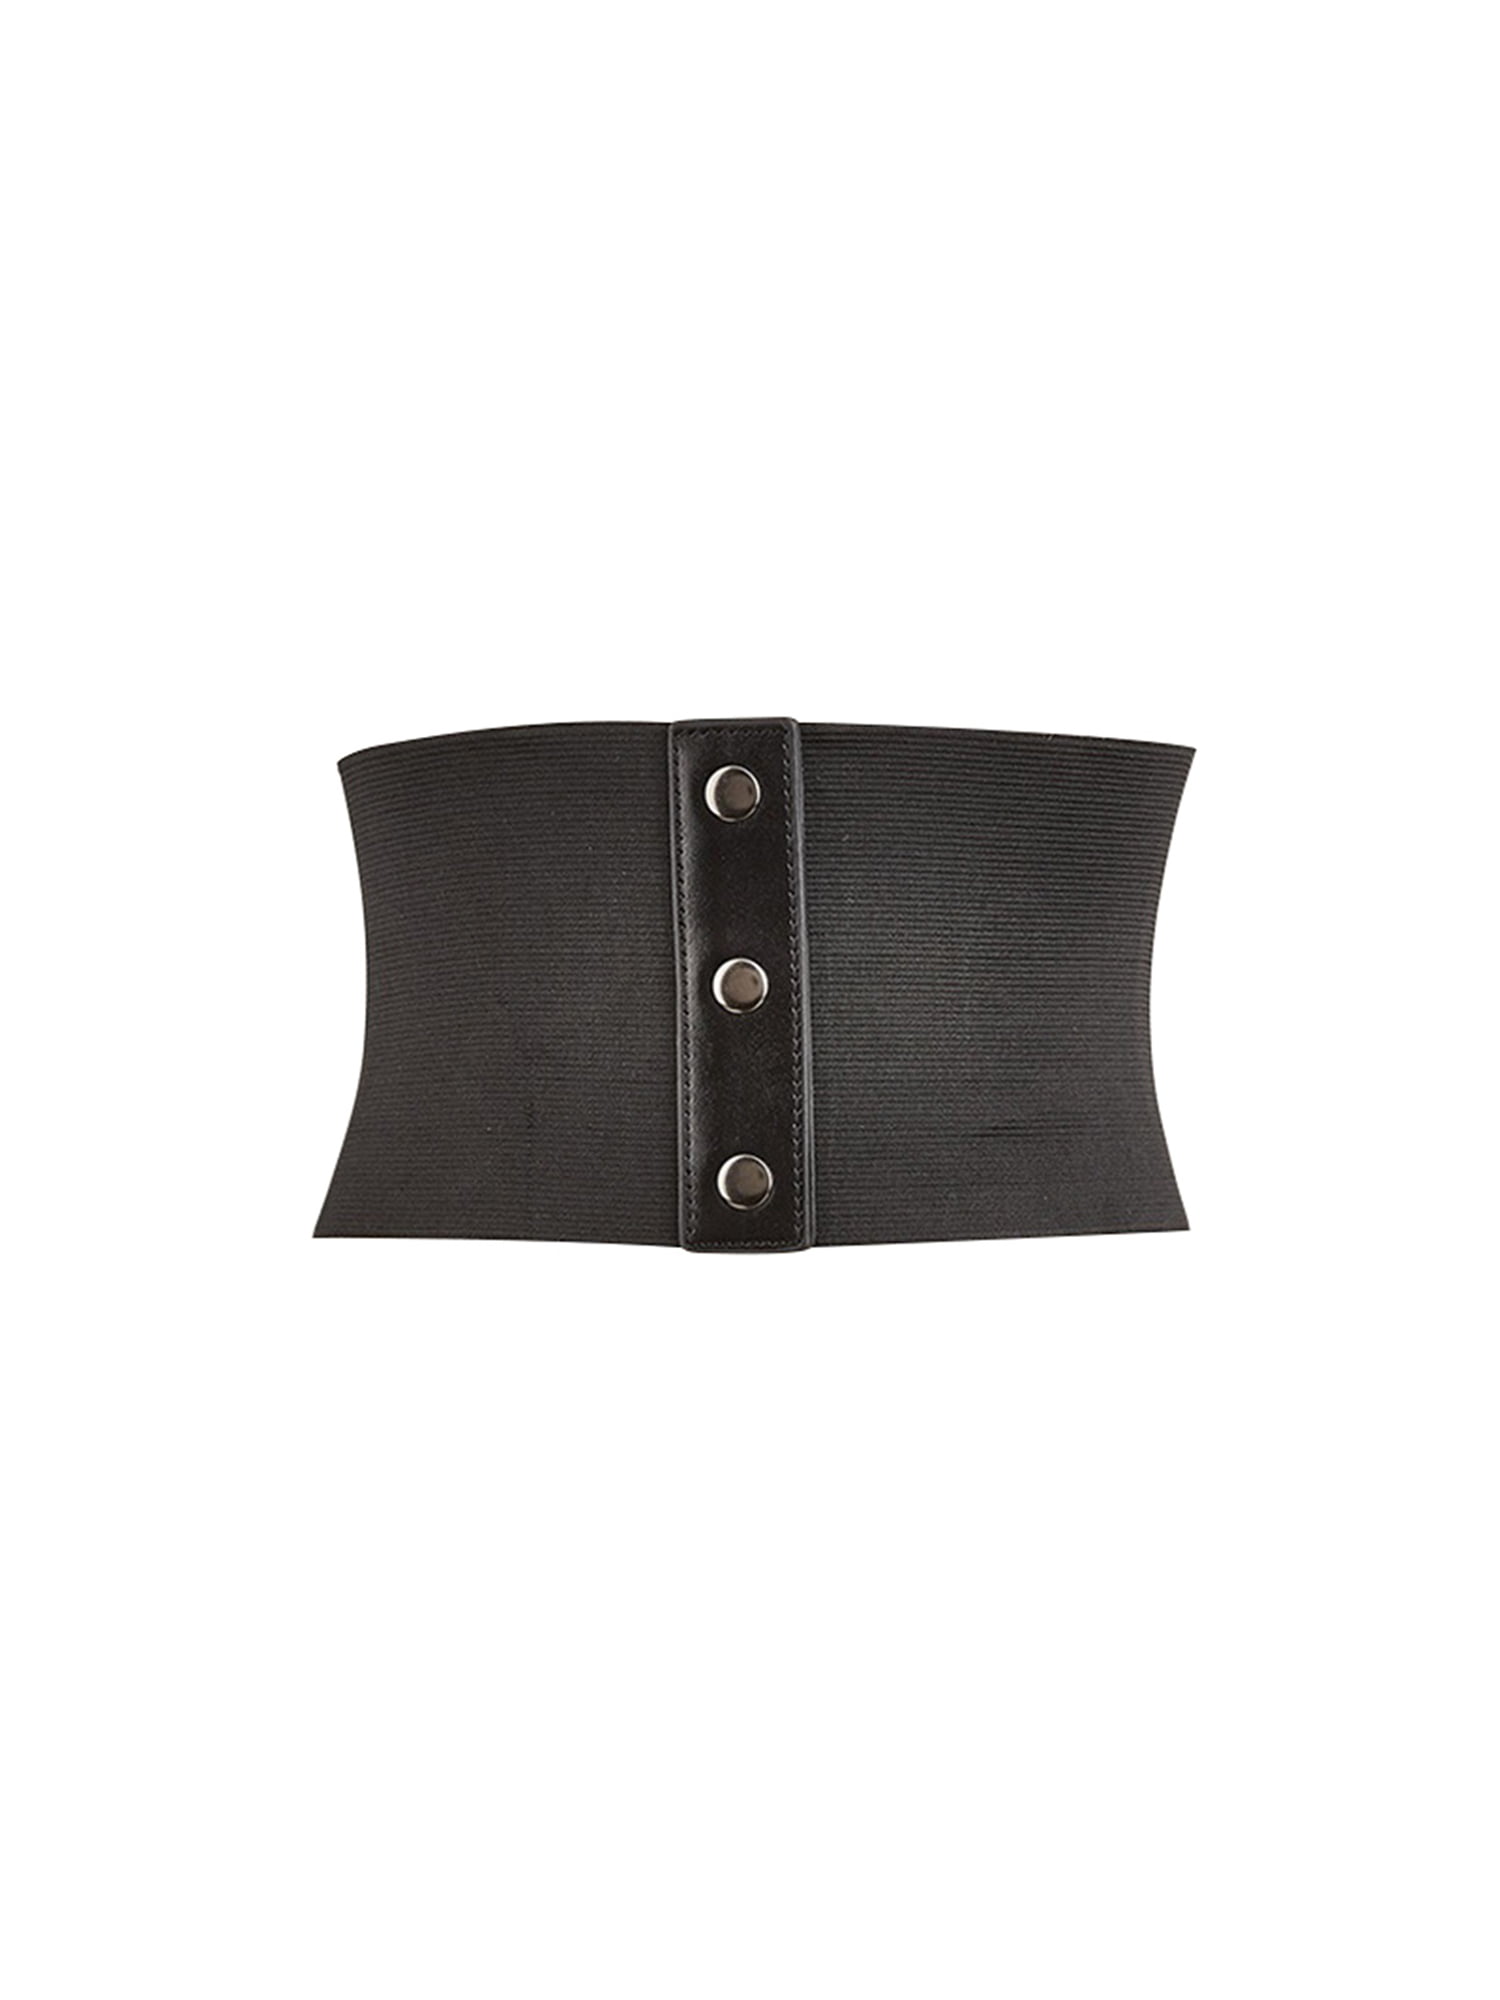 The Hourglass - Corset Style Leather Belt for Women, Black – Tiger Marrón